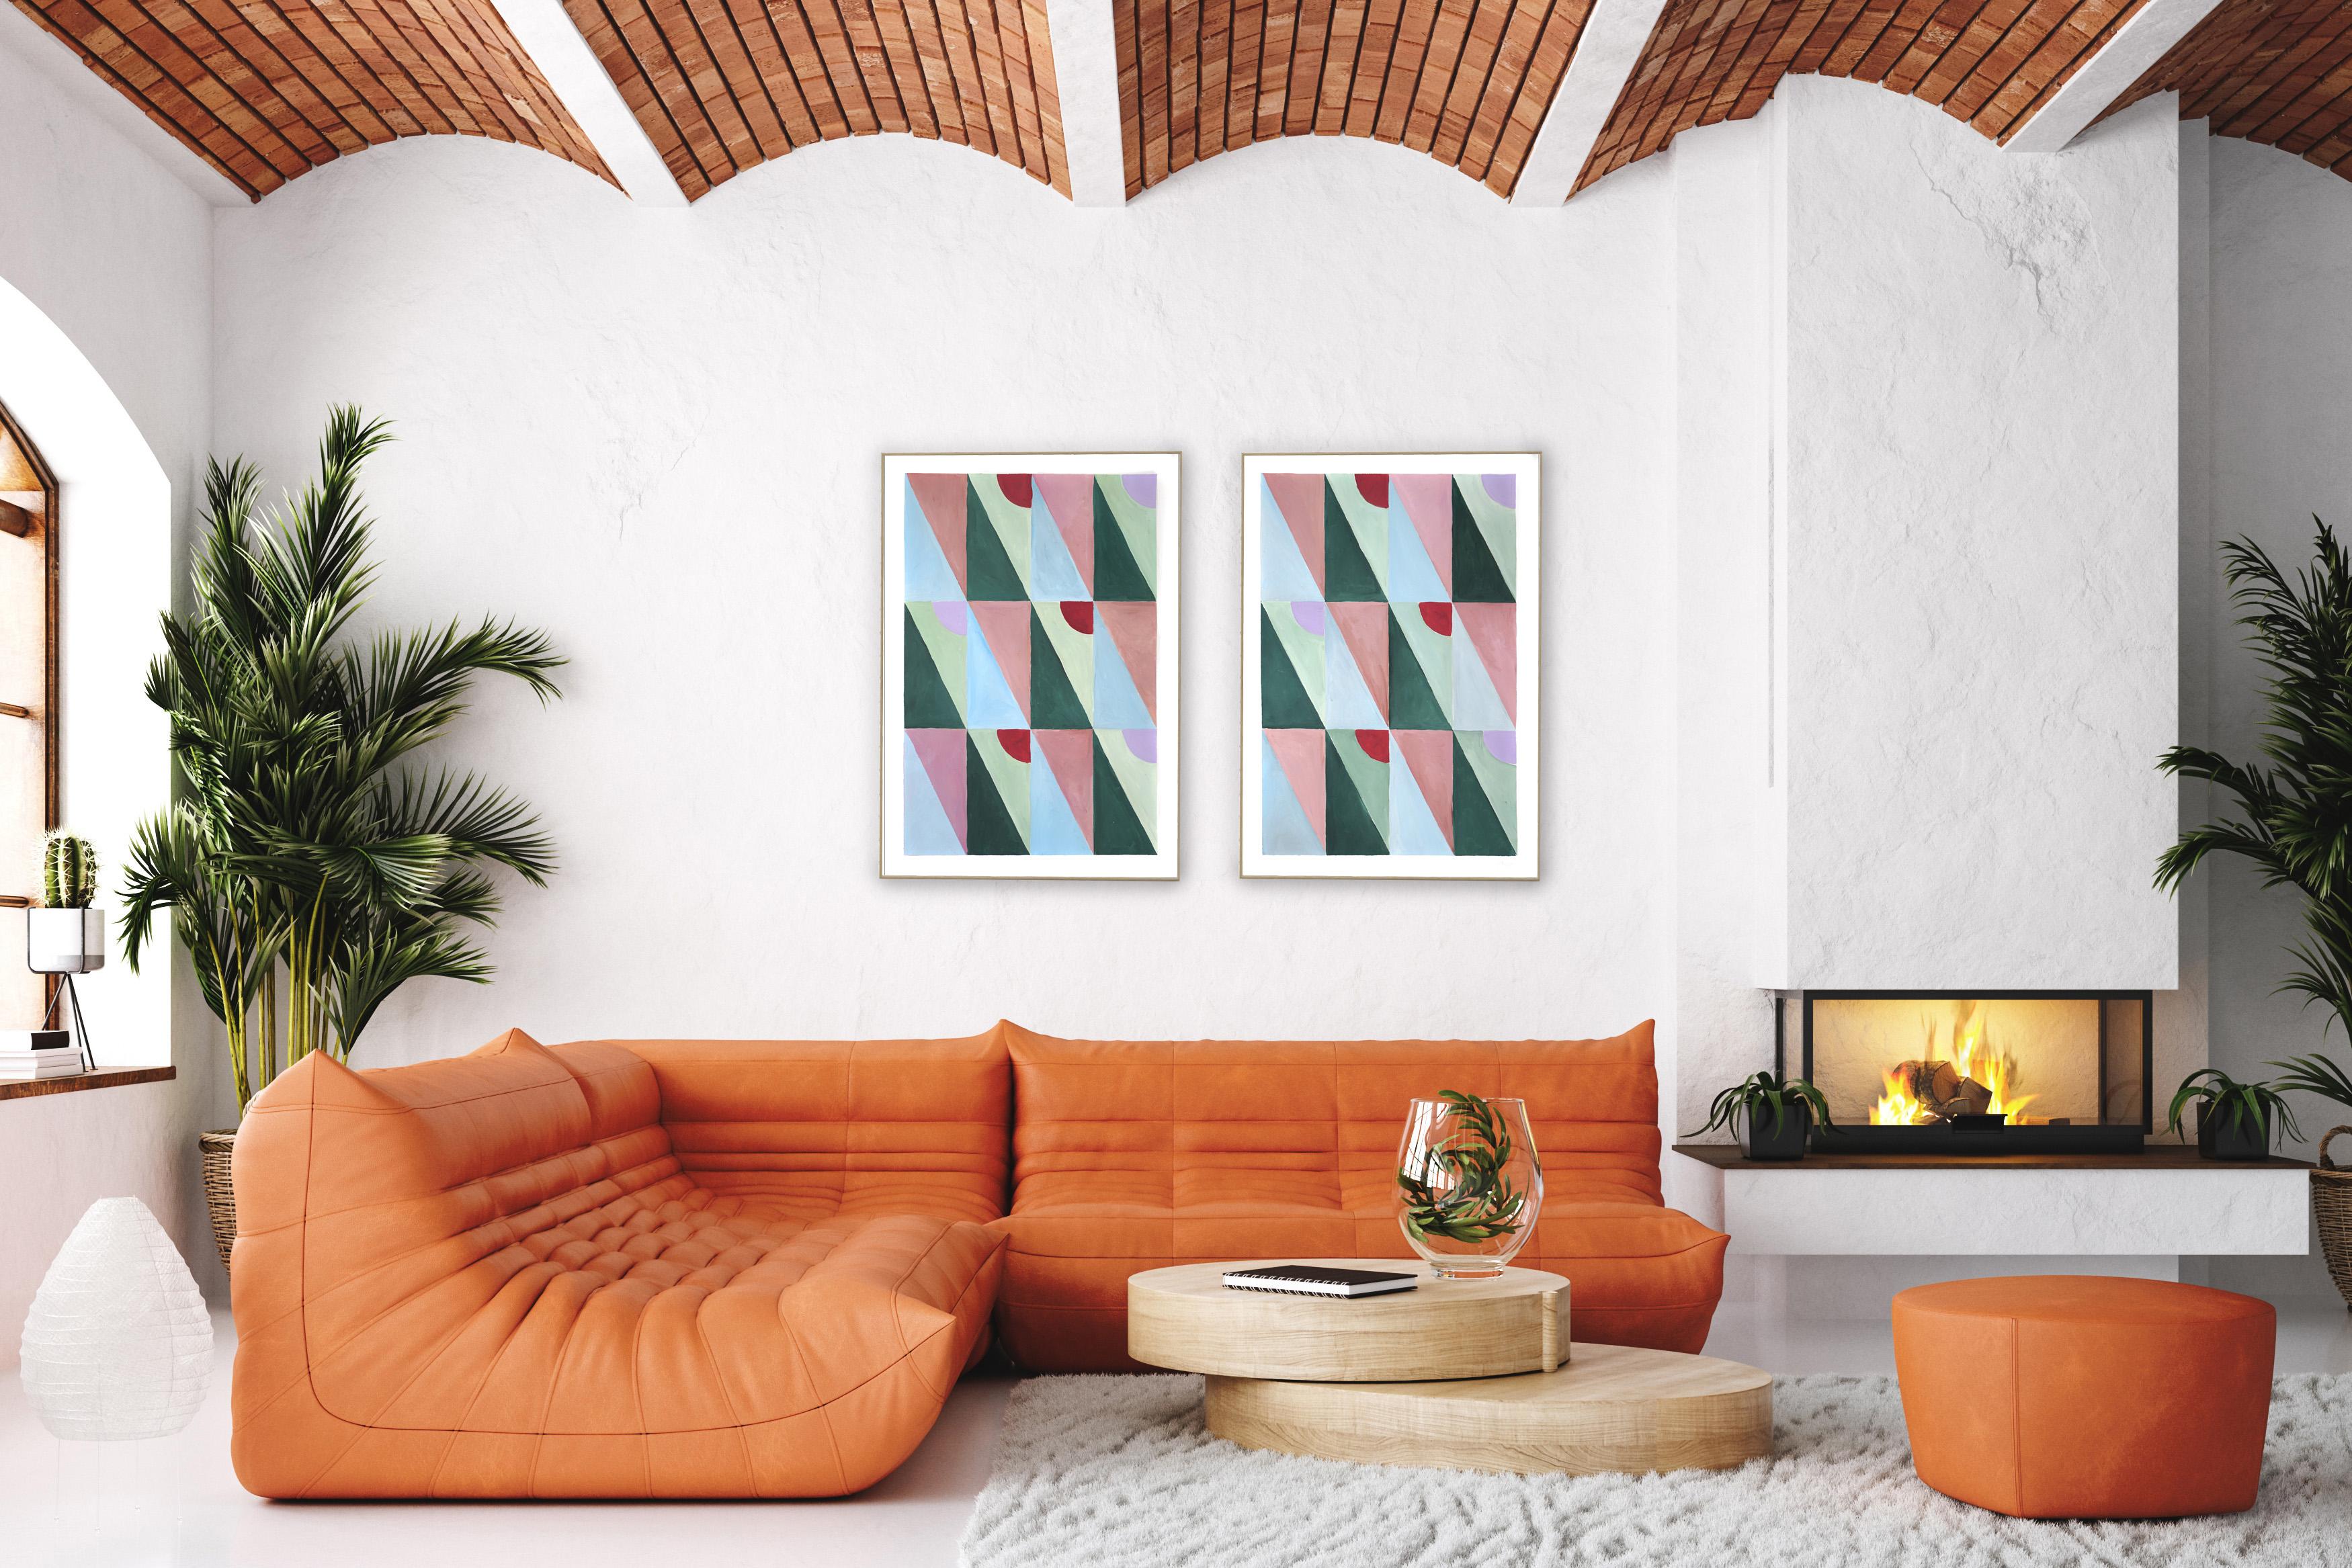 Pastel Tiles Combo Grid, Triangle Tiles Pattern Diptych, Pink and Green Bauhaus  - Art Deco Painting by Natalia Roman